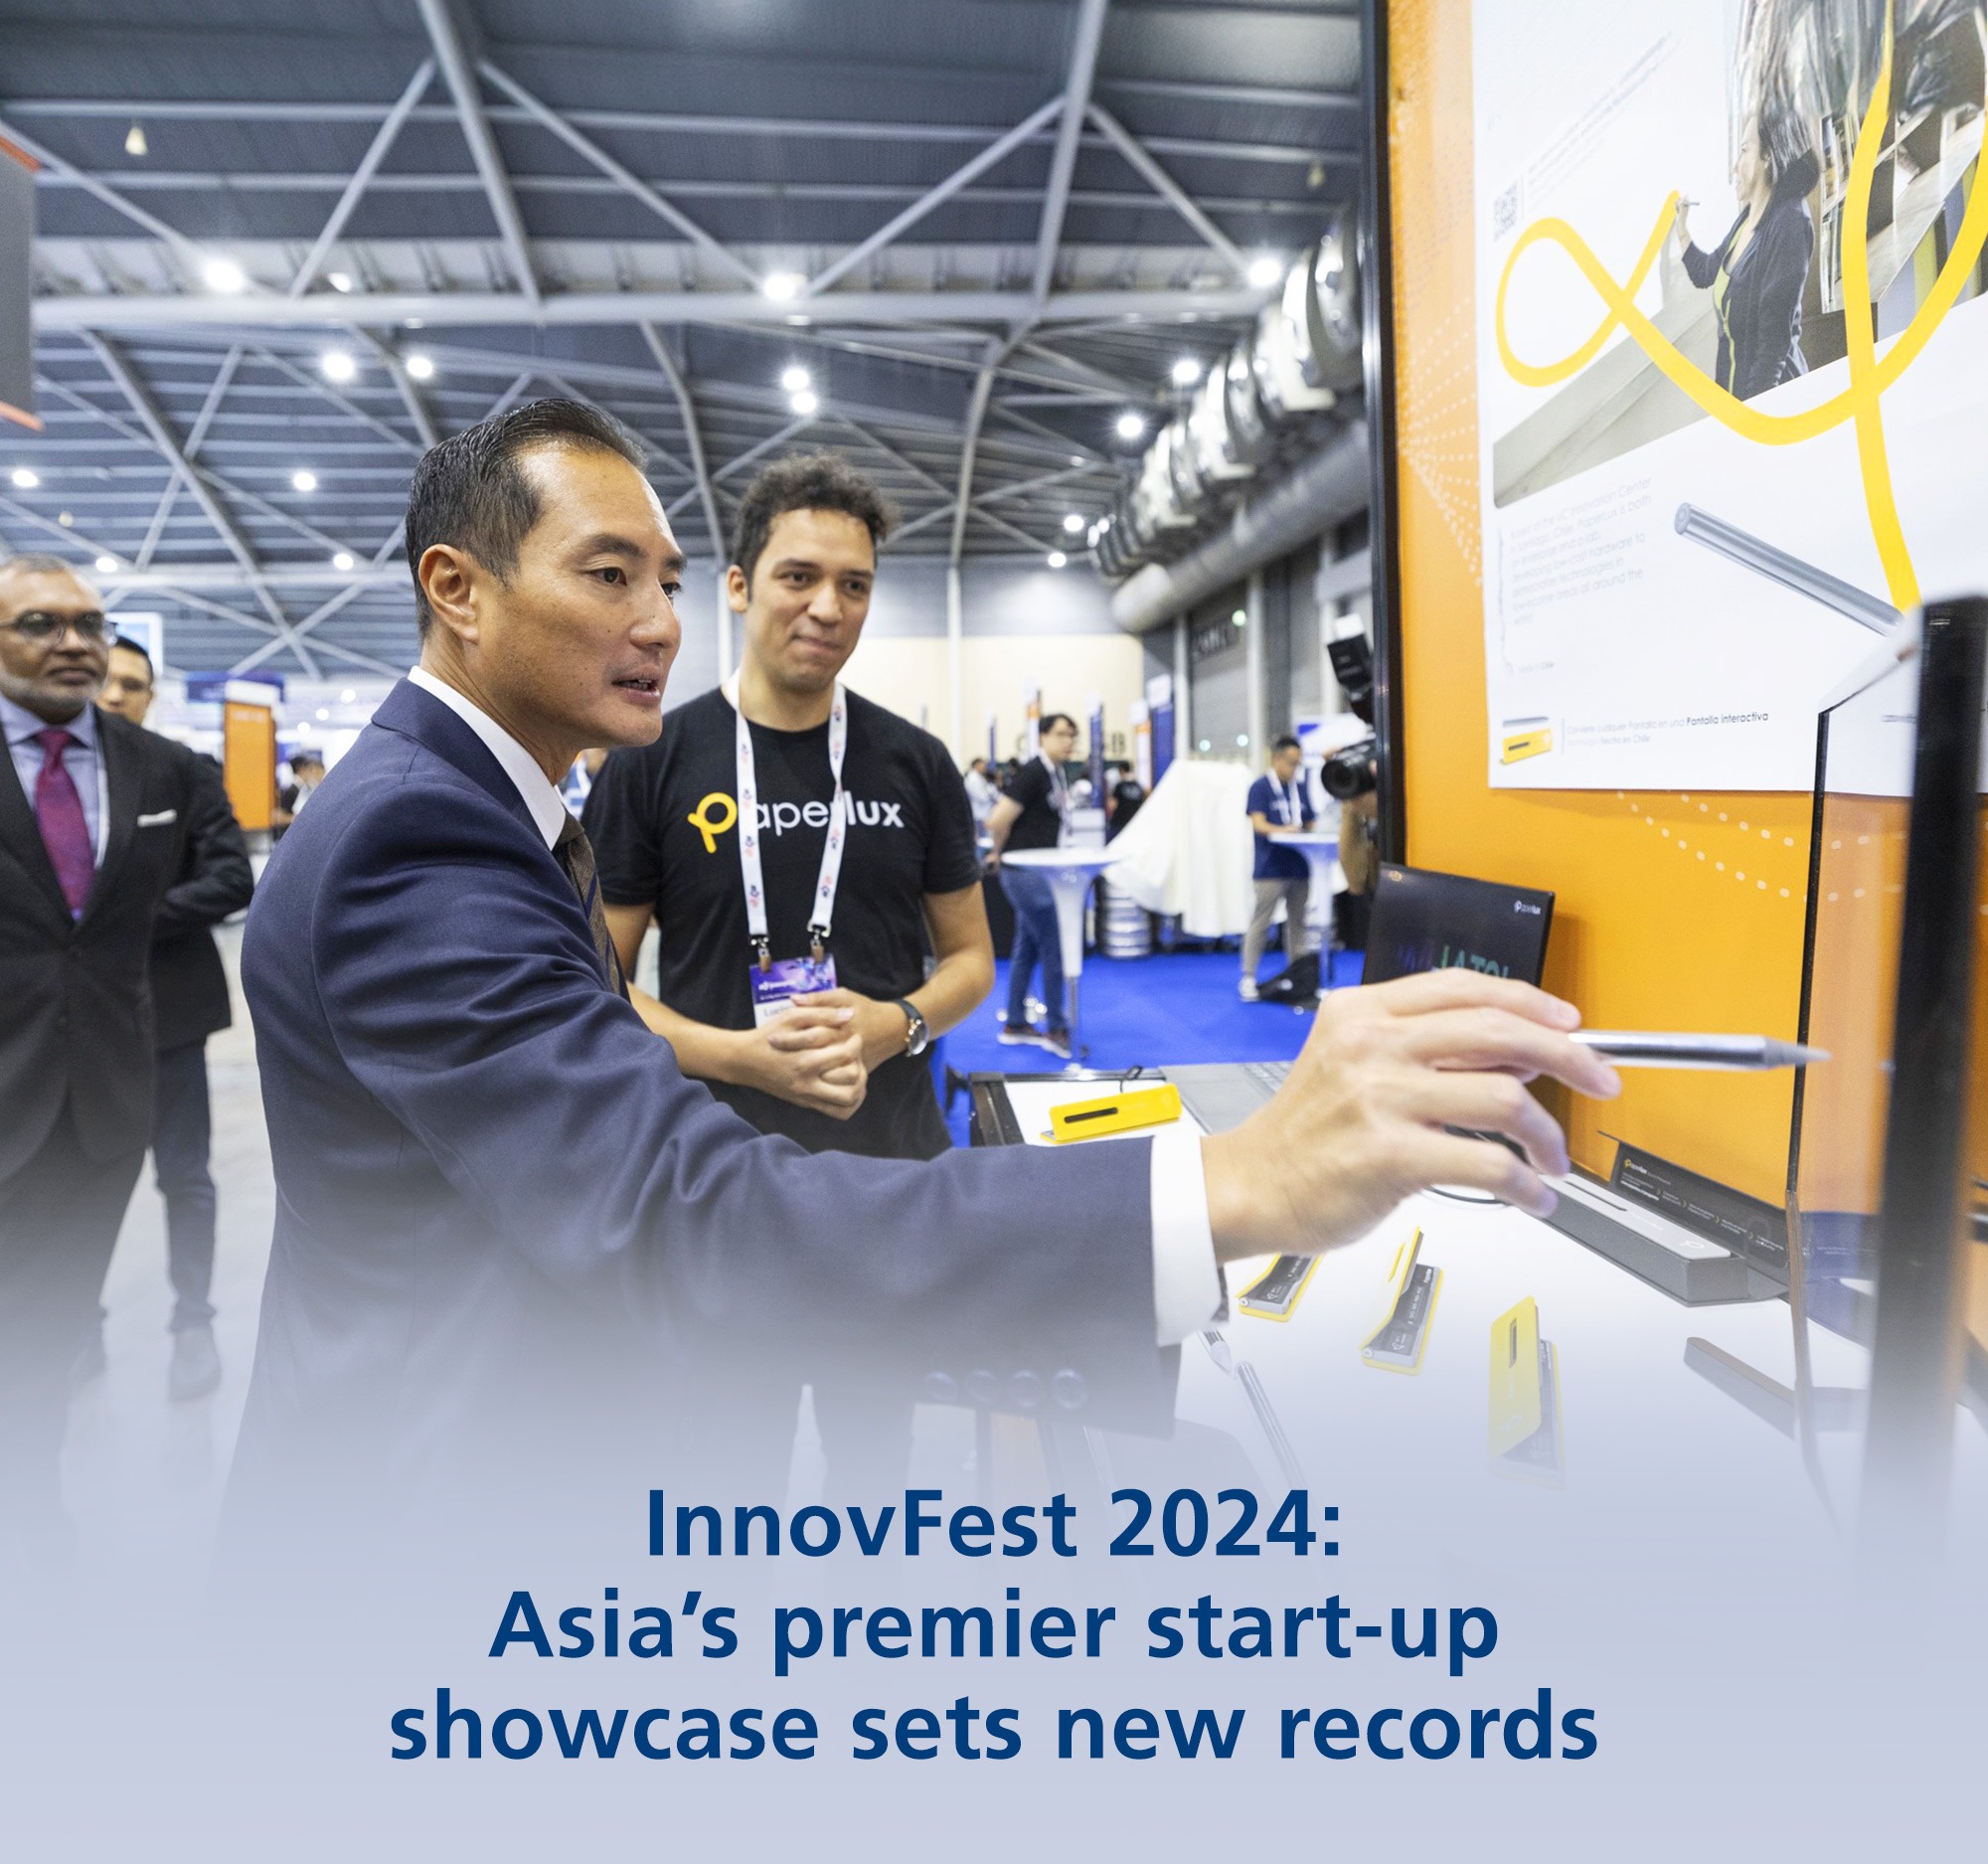 InnovFest 2024: Asia’s premier start-up showcase sets new records